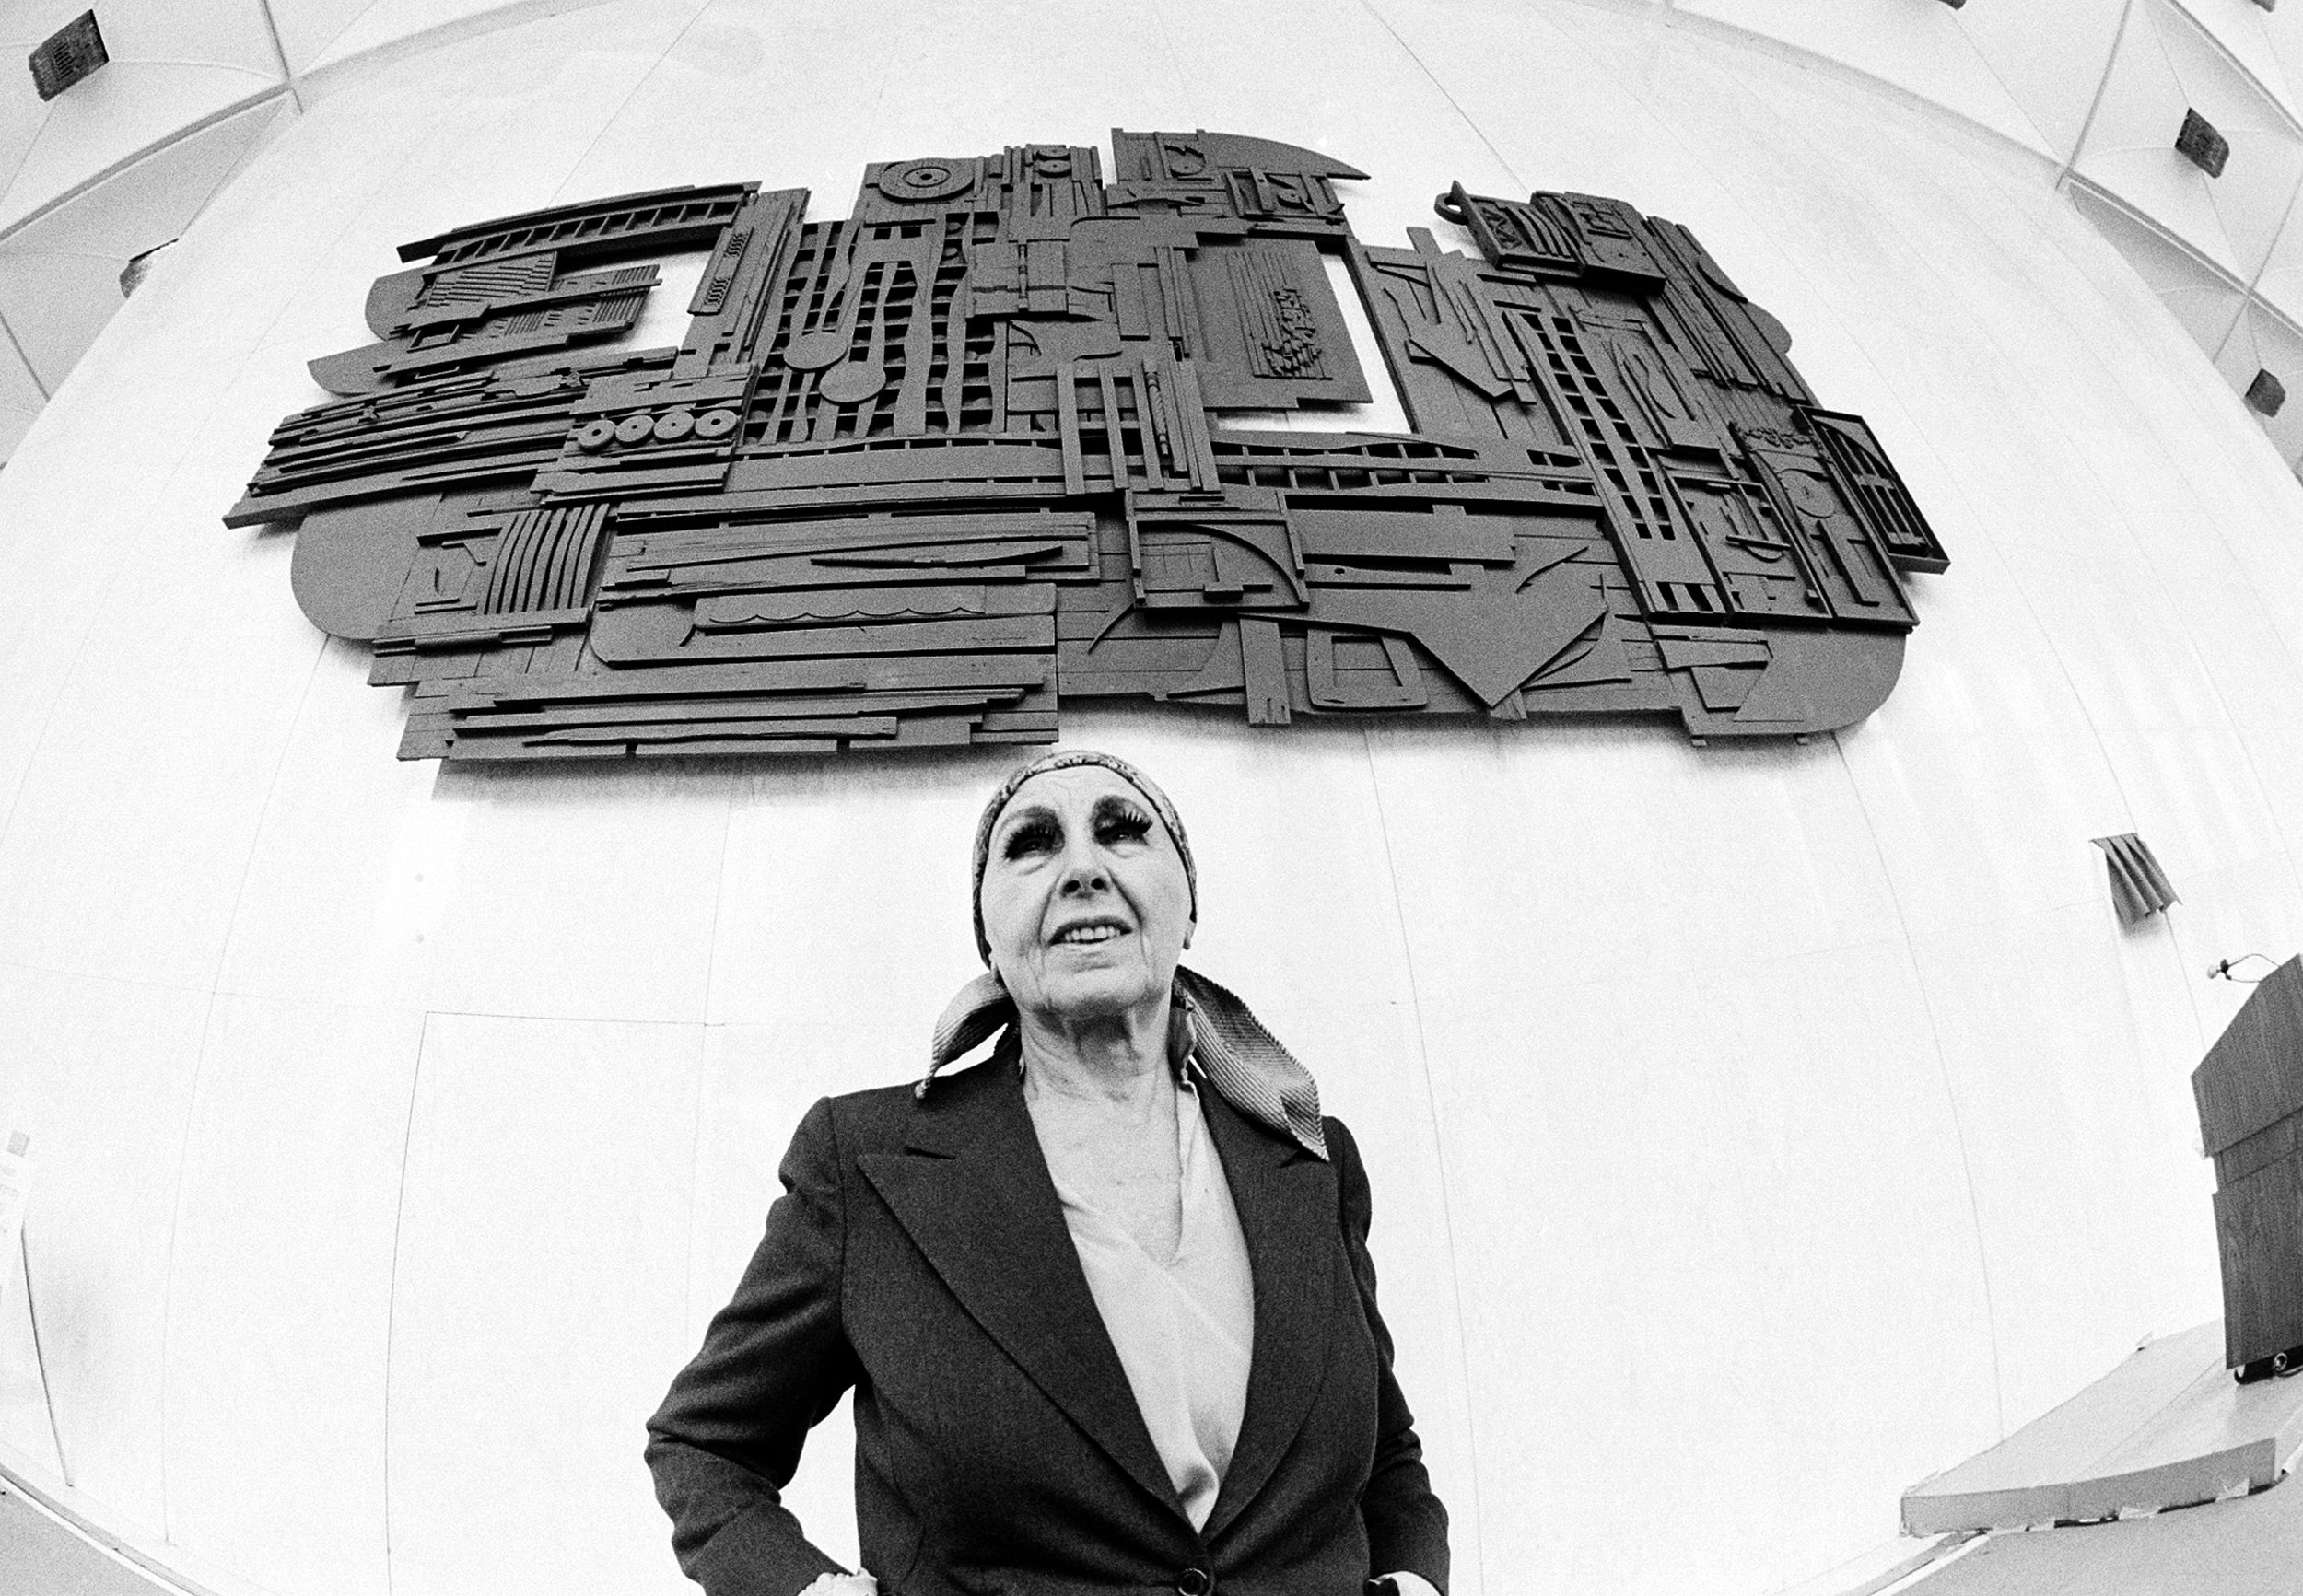  Artist Louise Nevelson poses beneath her work "Sky Gate, New York" during its unveiling at New York's World Trade Center in lower Manhattan on Tues. Dec. 12, 1978.  The sculpture, formed of black wood and measuring 17 feet high, 32 feet wide and one